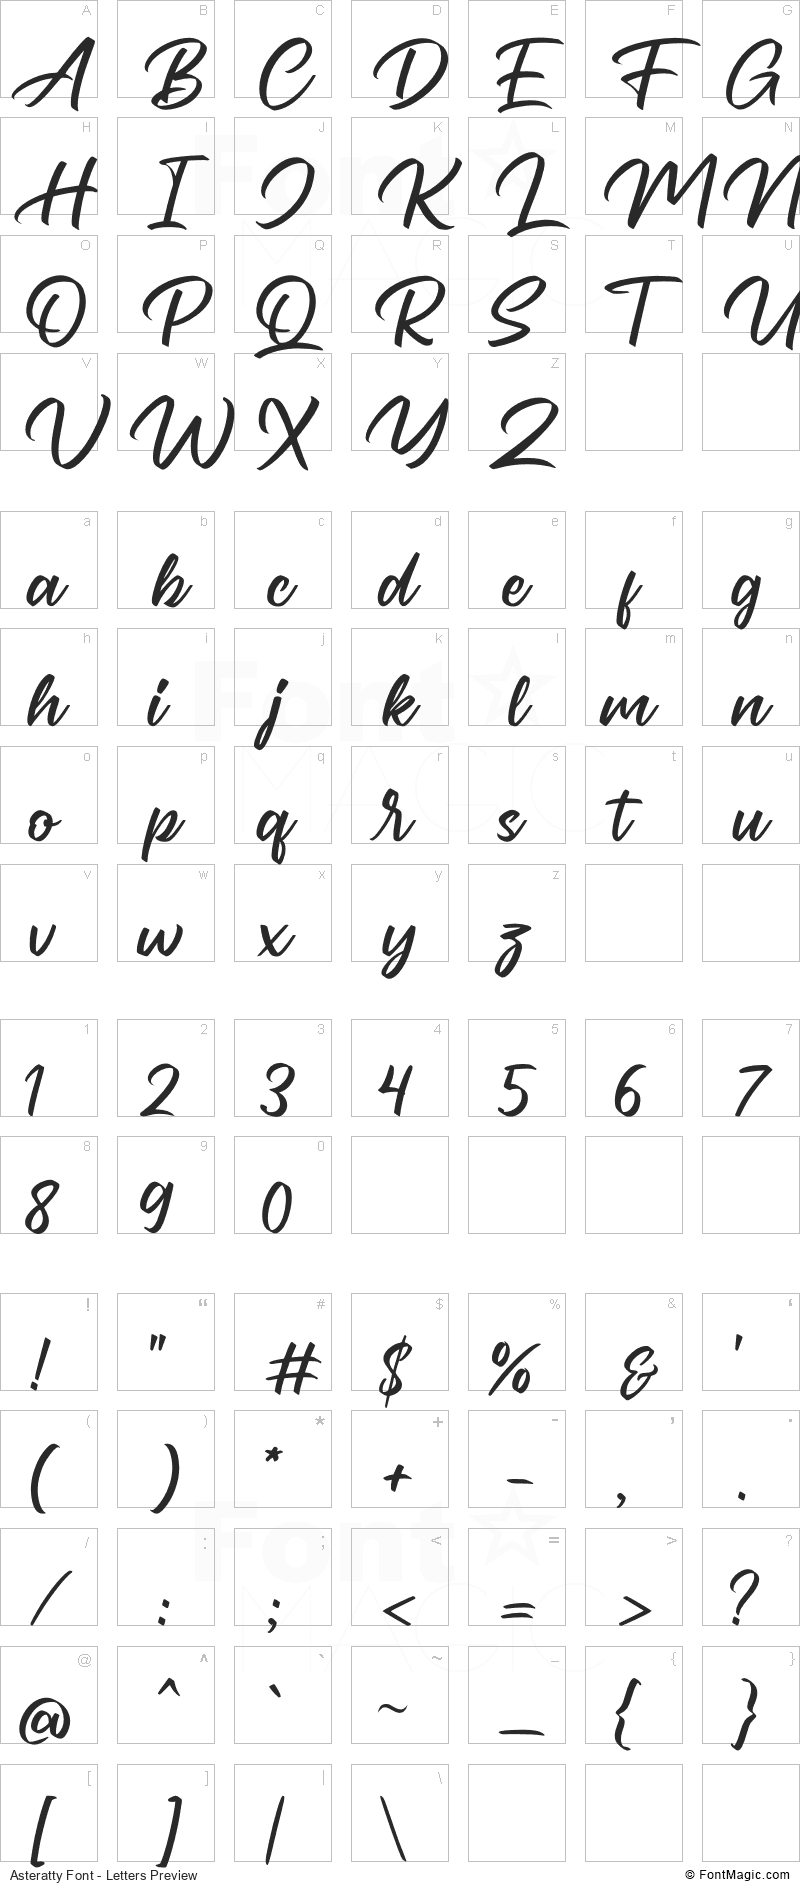 Asteratty Font - All Latters Preview Chart